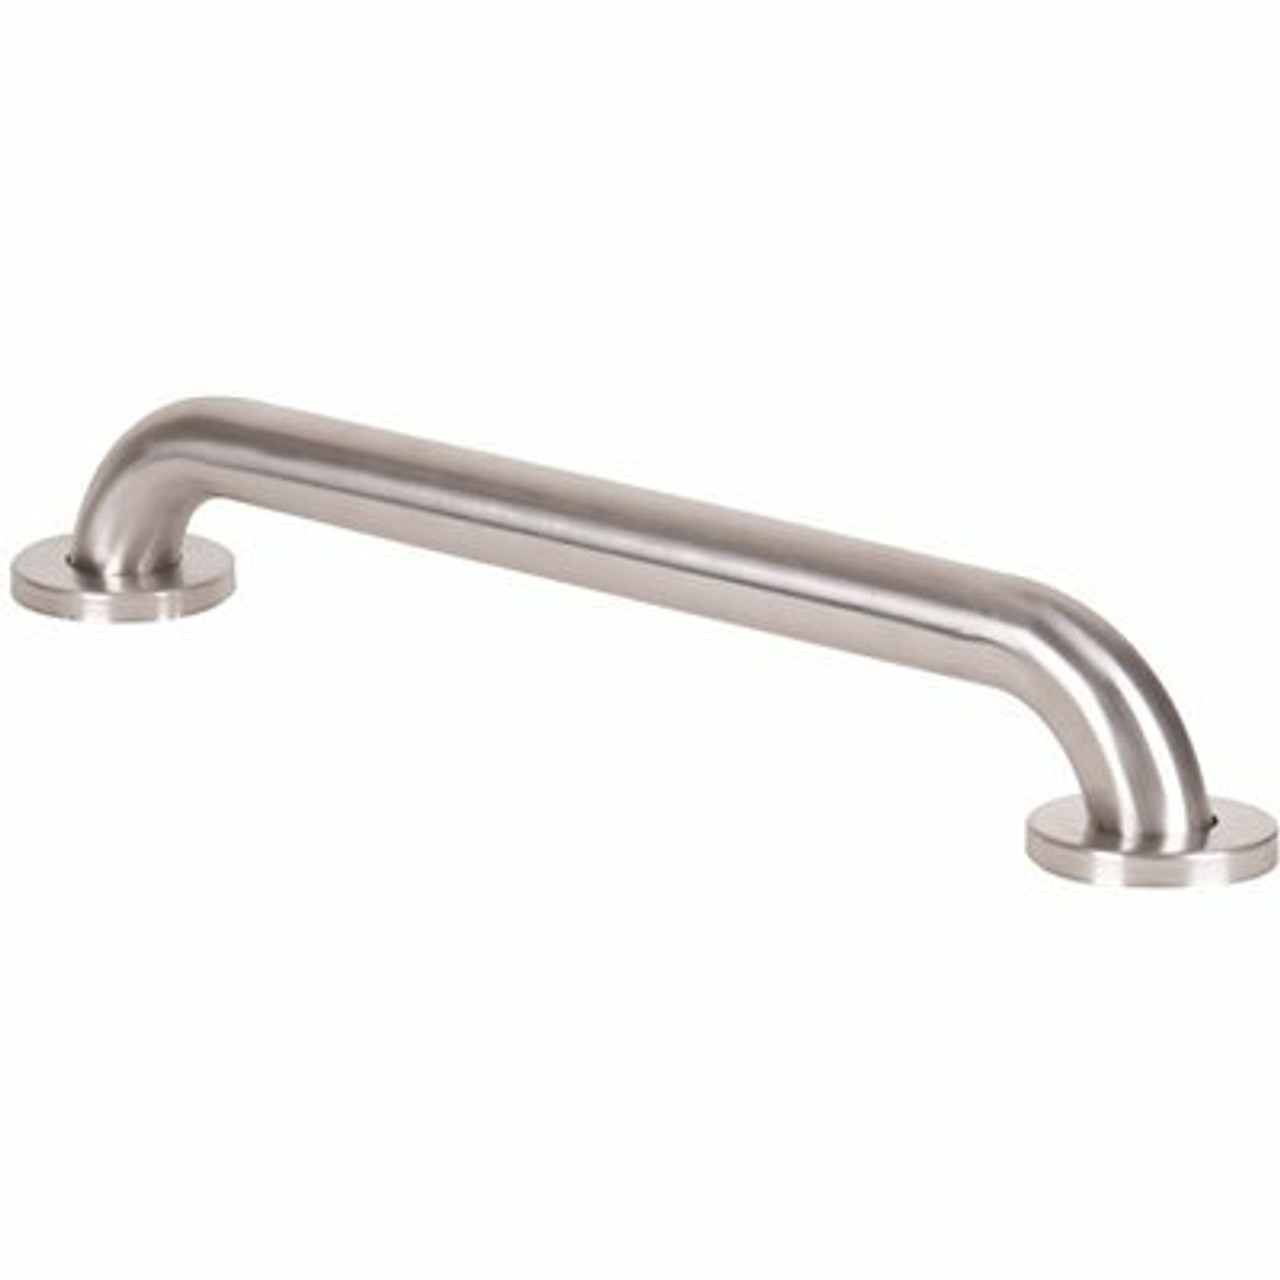 Lodging Star 24 In. X 1-1/2 In. L Grab Bar In Stainless Steel